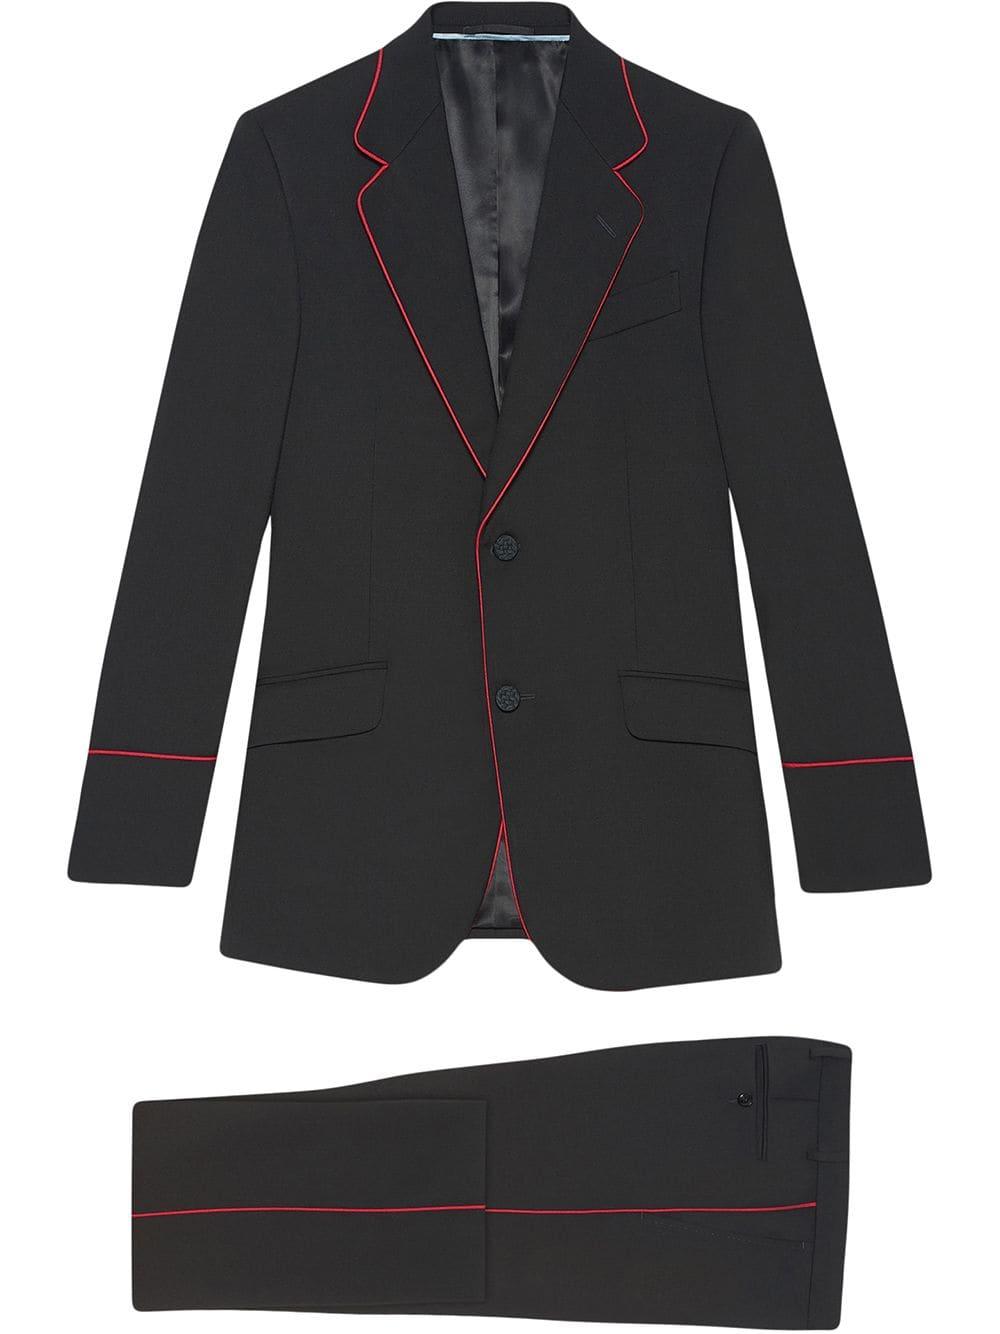 Gucci Canvas Heritage Tuxedo With Piping Black for Men - Lyst